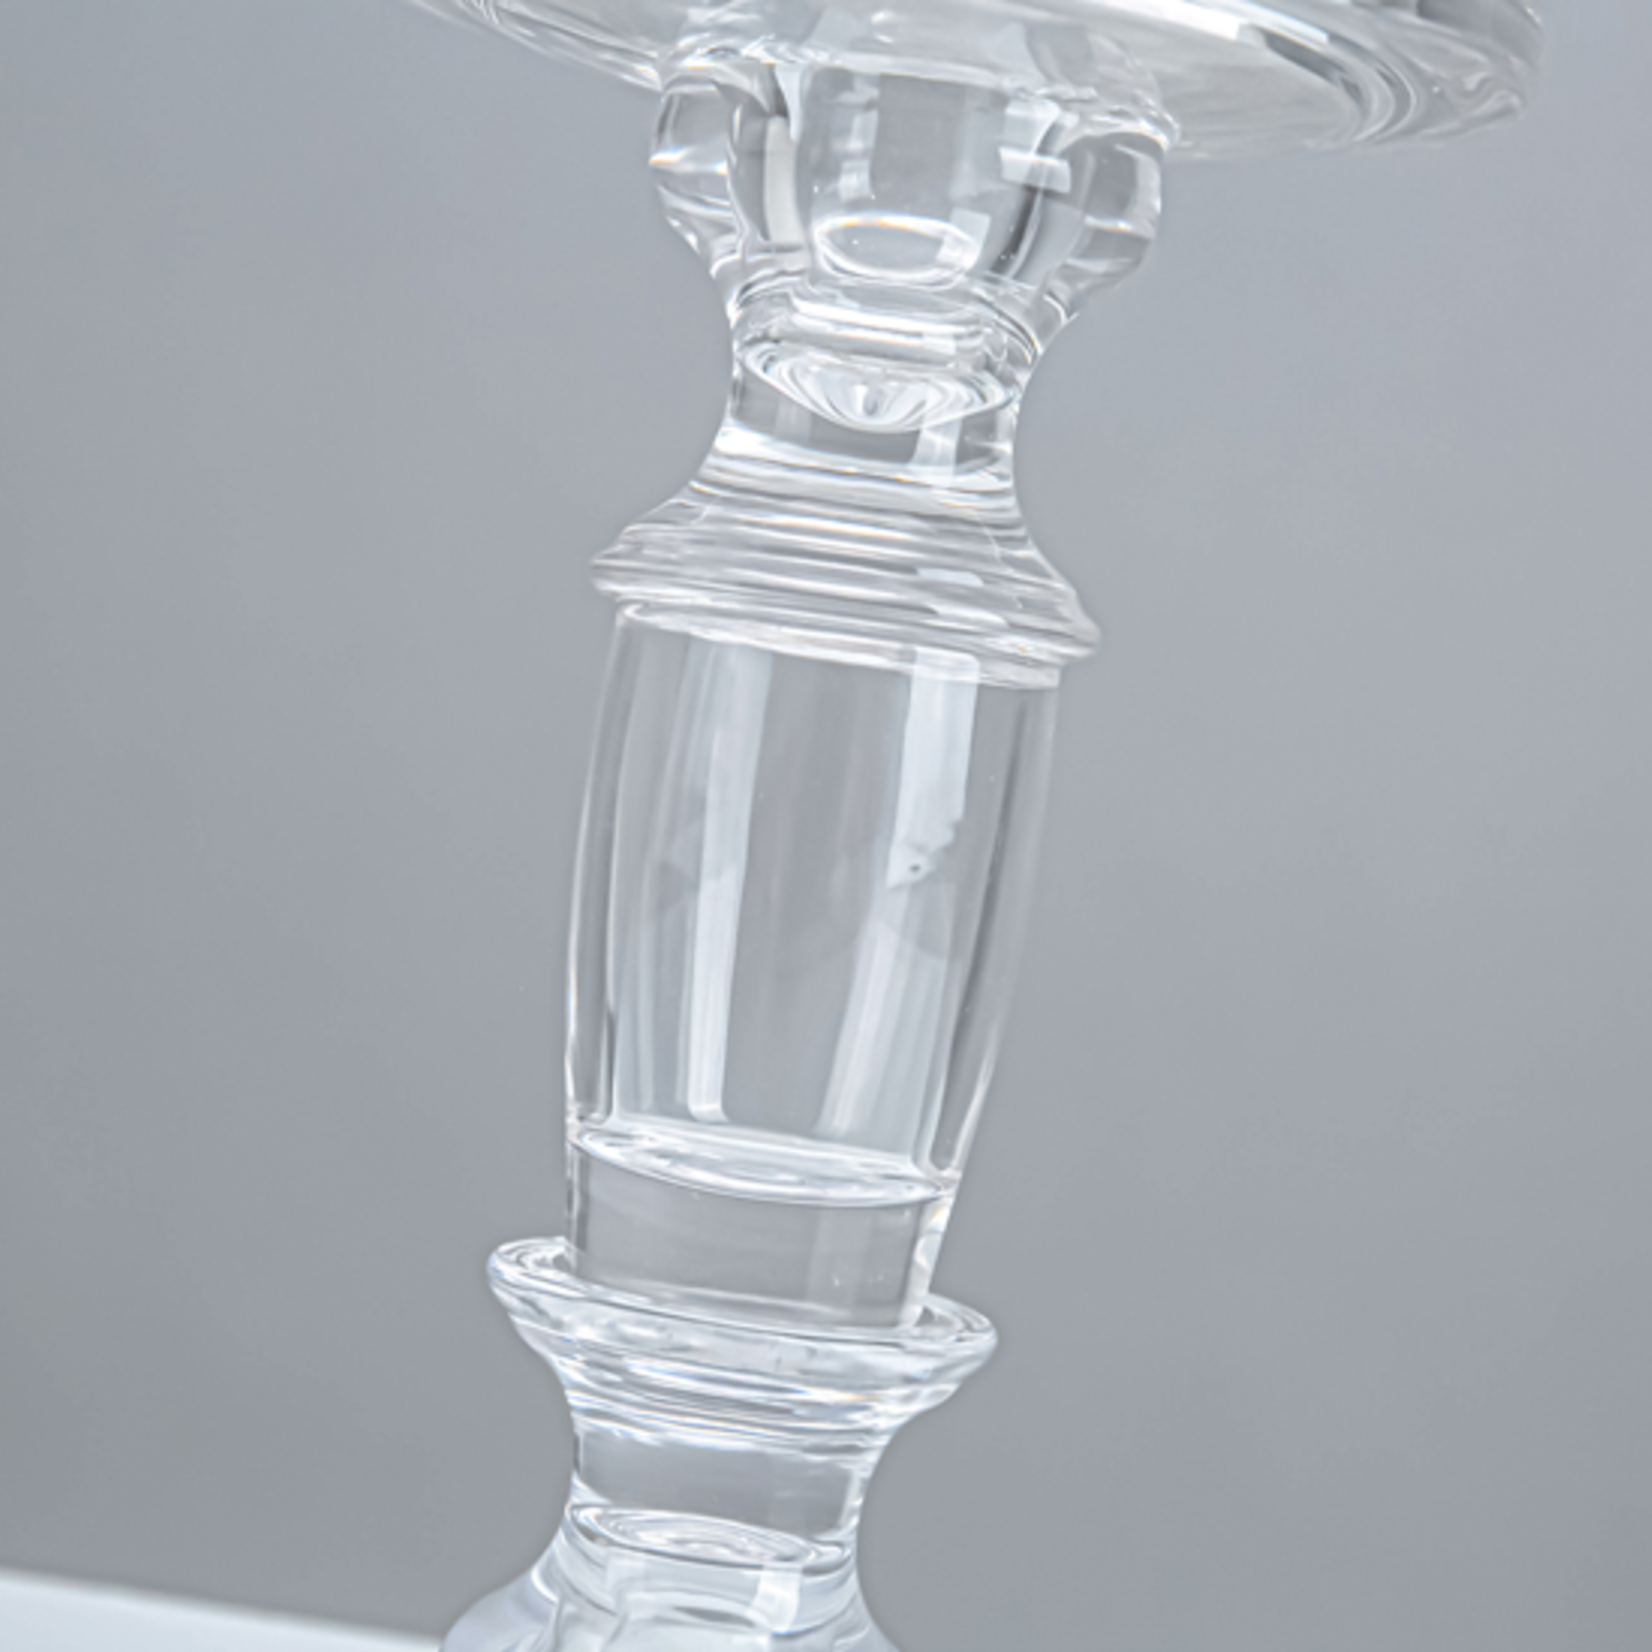 7.5”H X 4.5” CRYSTAL GLASS CANDLEHOLDER FOR PILLAR AND/OR TAPER